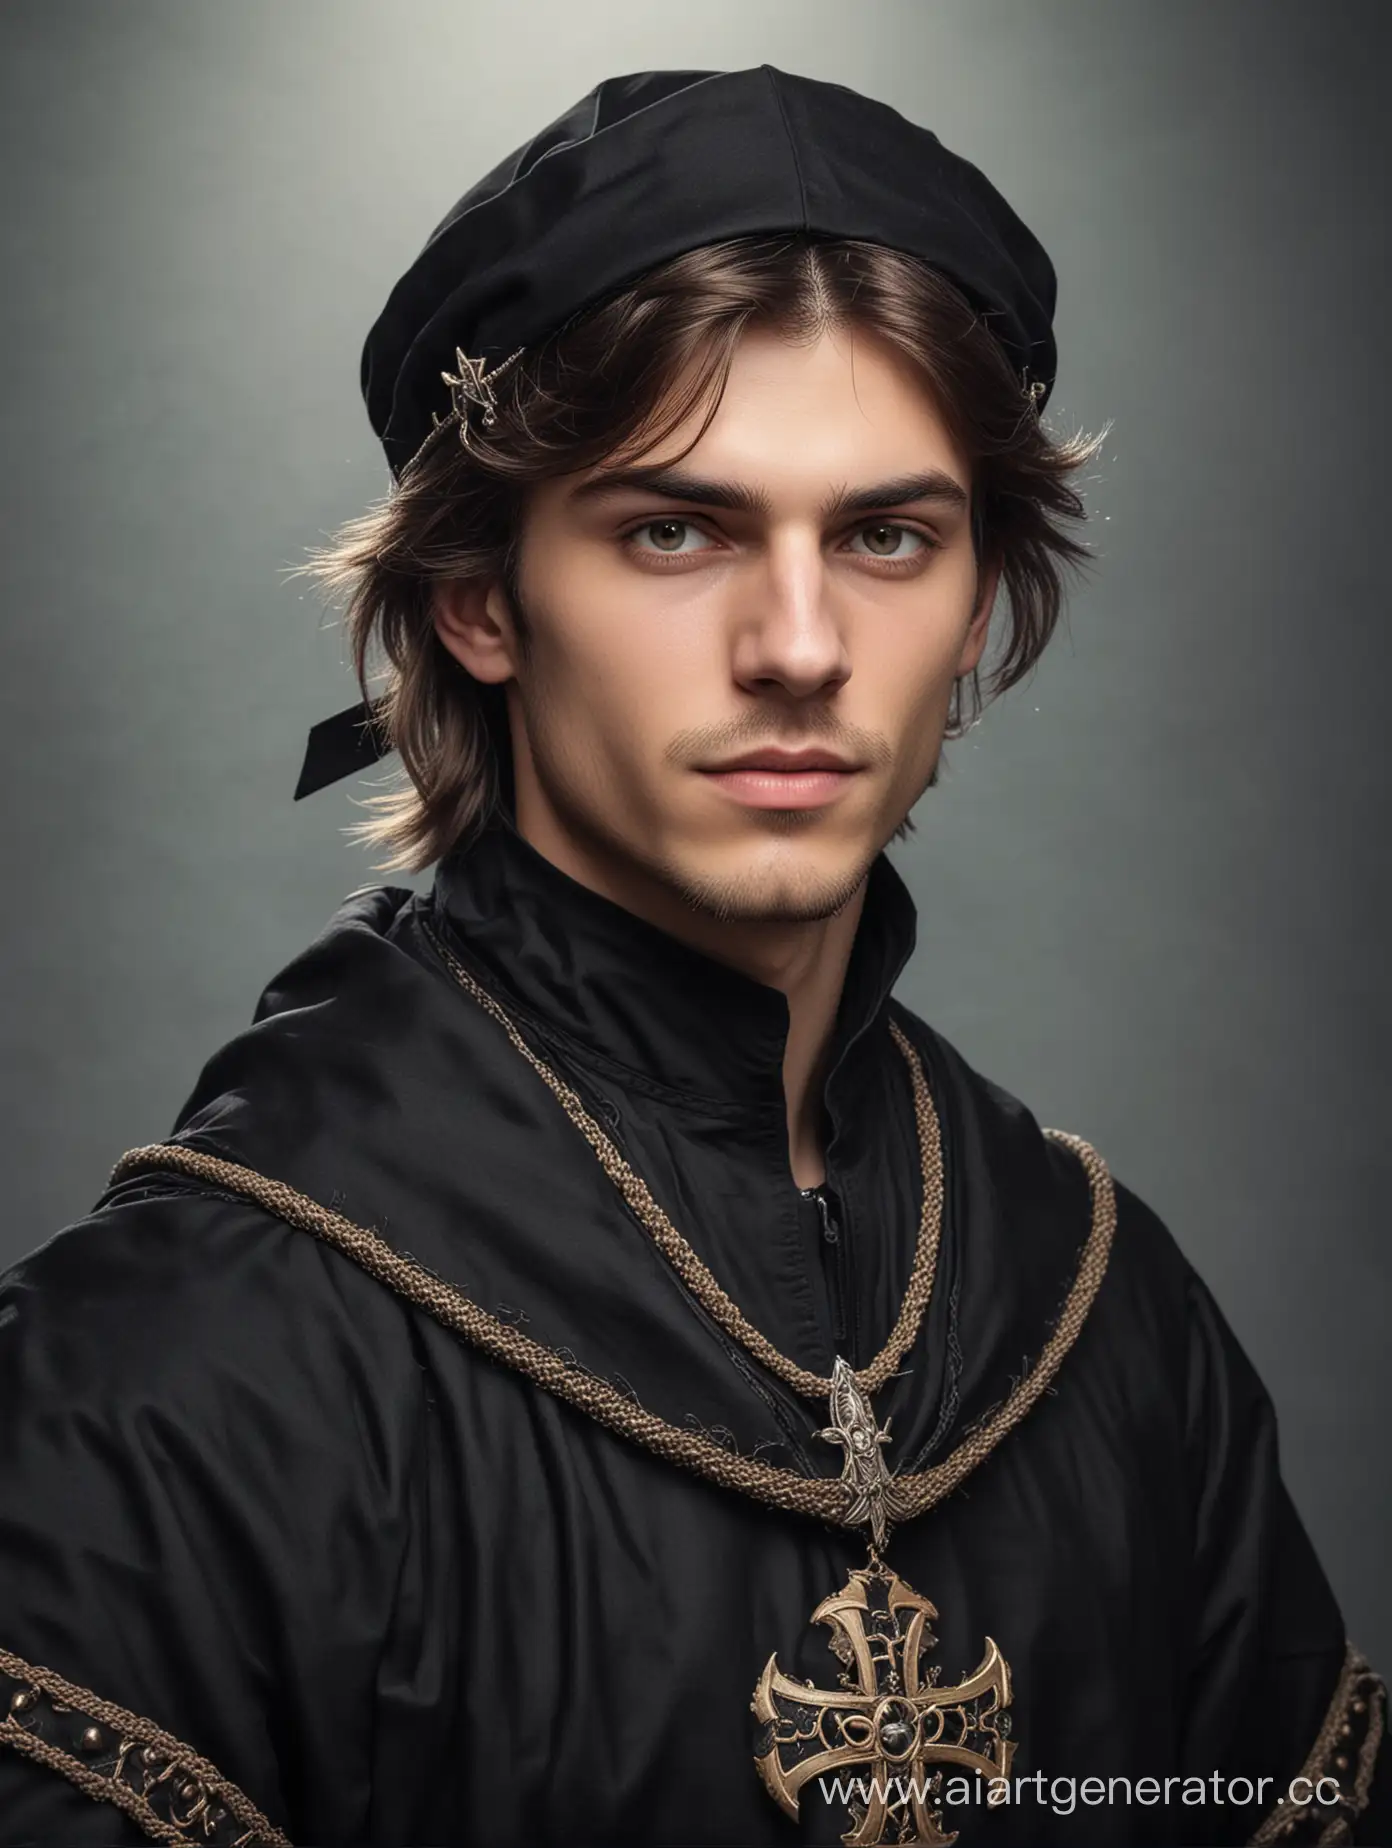 A young man from the Middle Ages, 24 years old, dressed in black clothes, wearing a brigantine, a chaperon on top of his head, a picture in the style of the Witcher